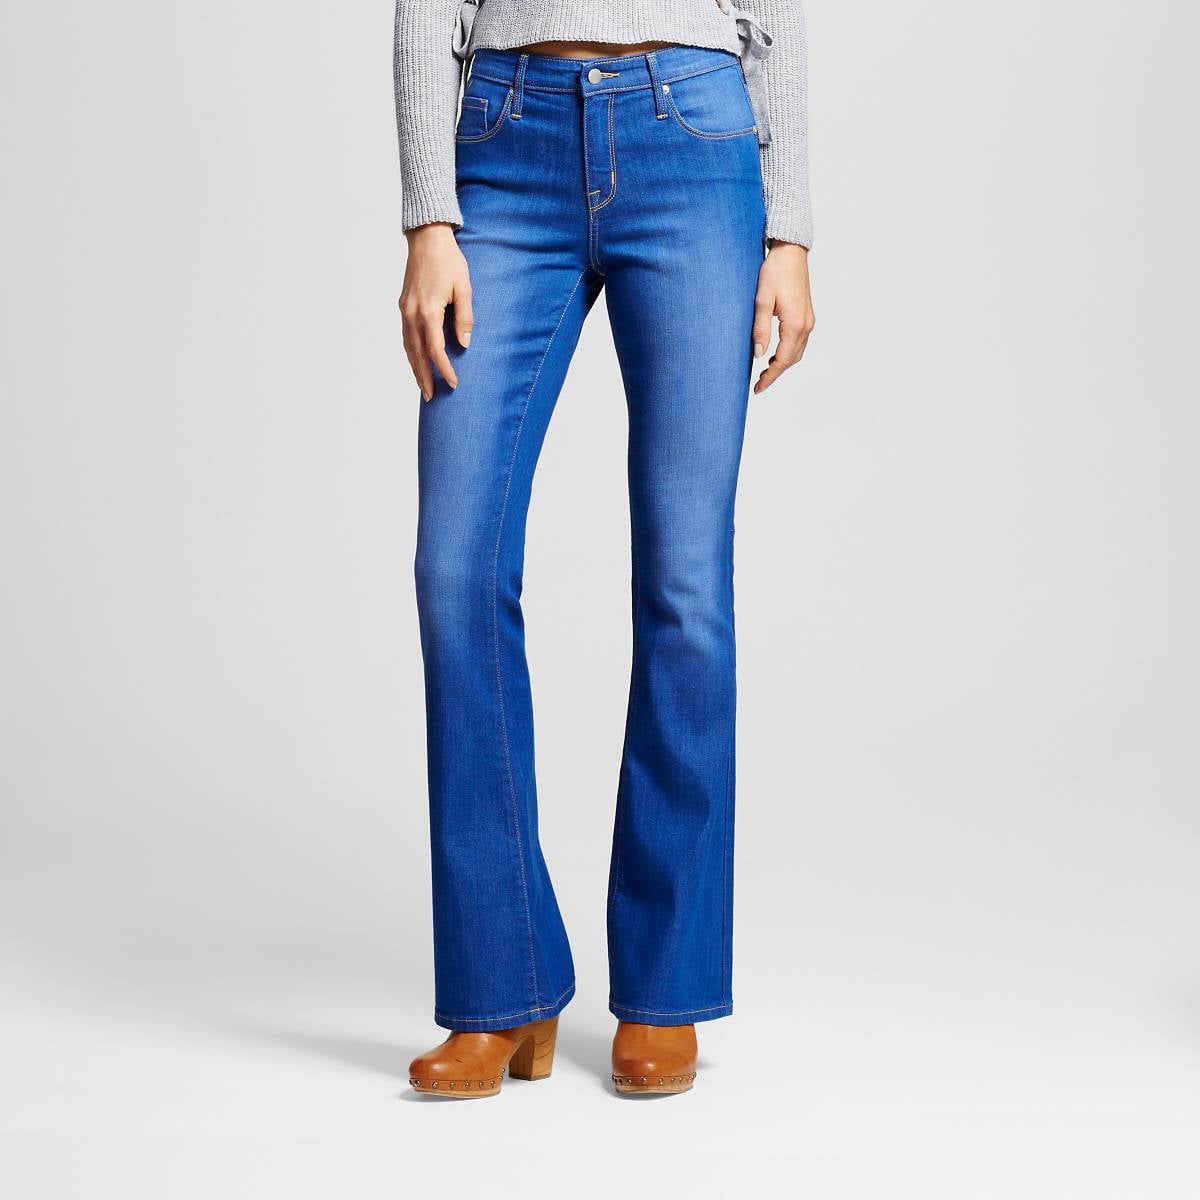 mossimo flare jeans